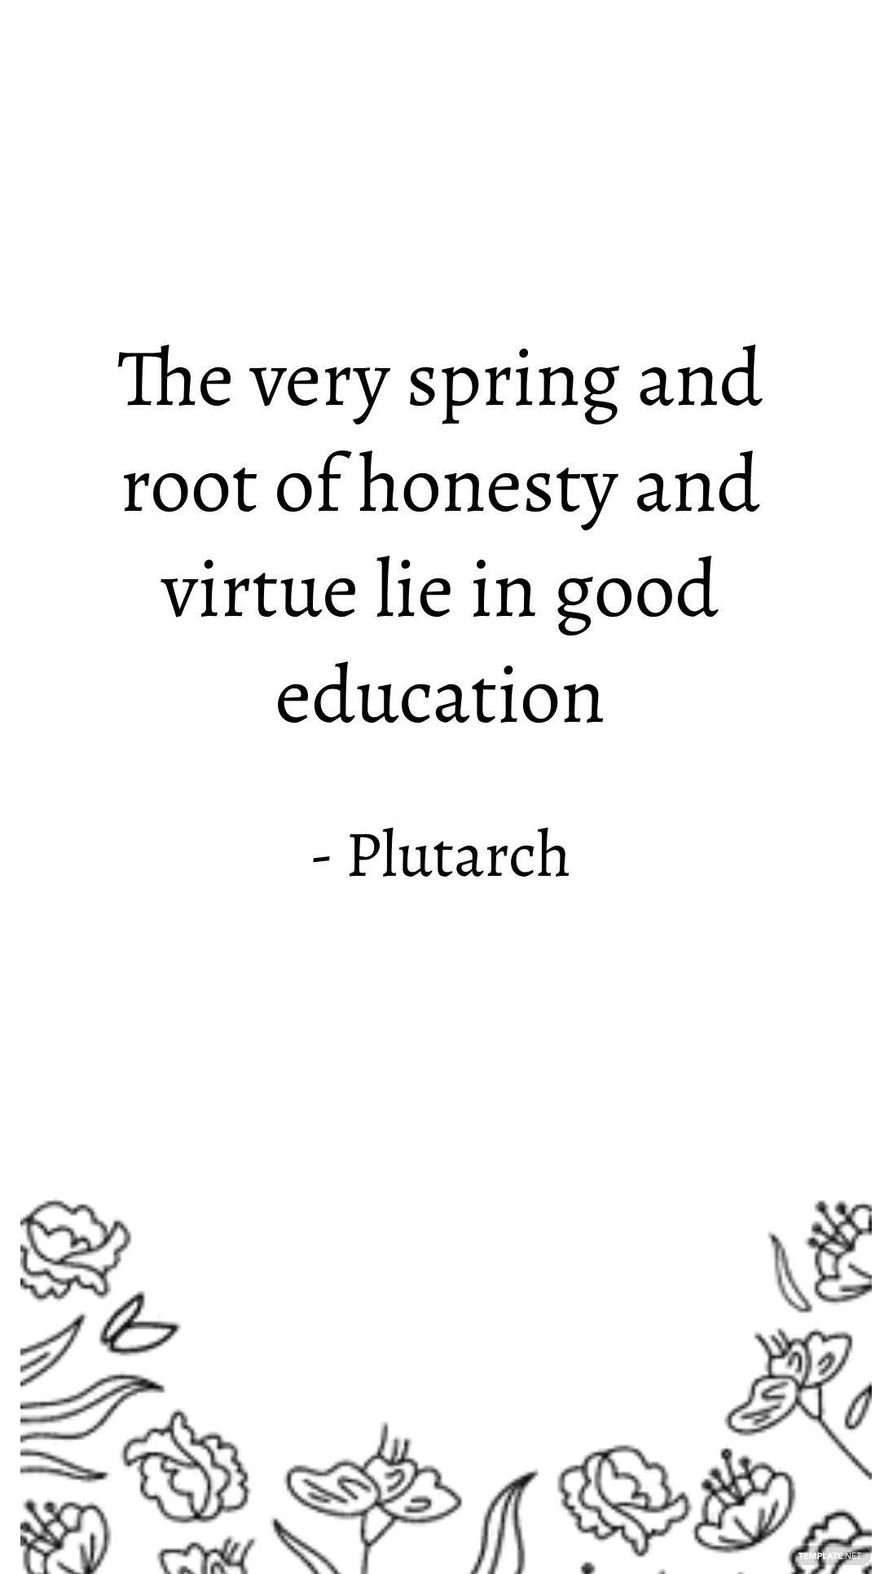 Plutarch - The very spring and root of honesty and virtue lie in good education